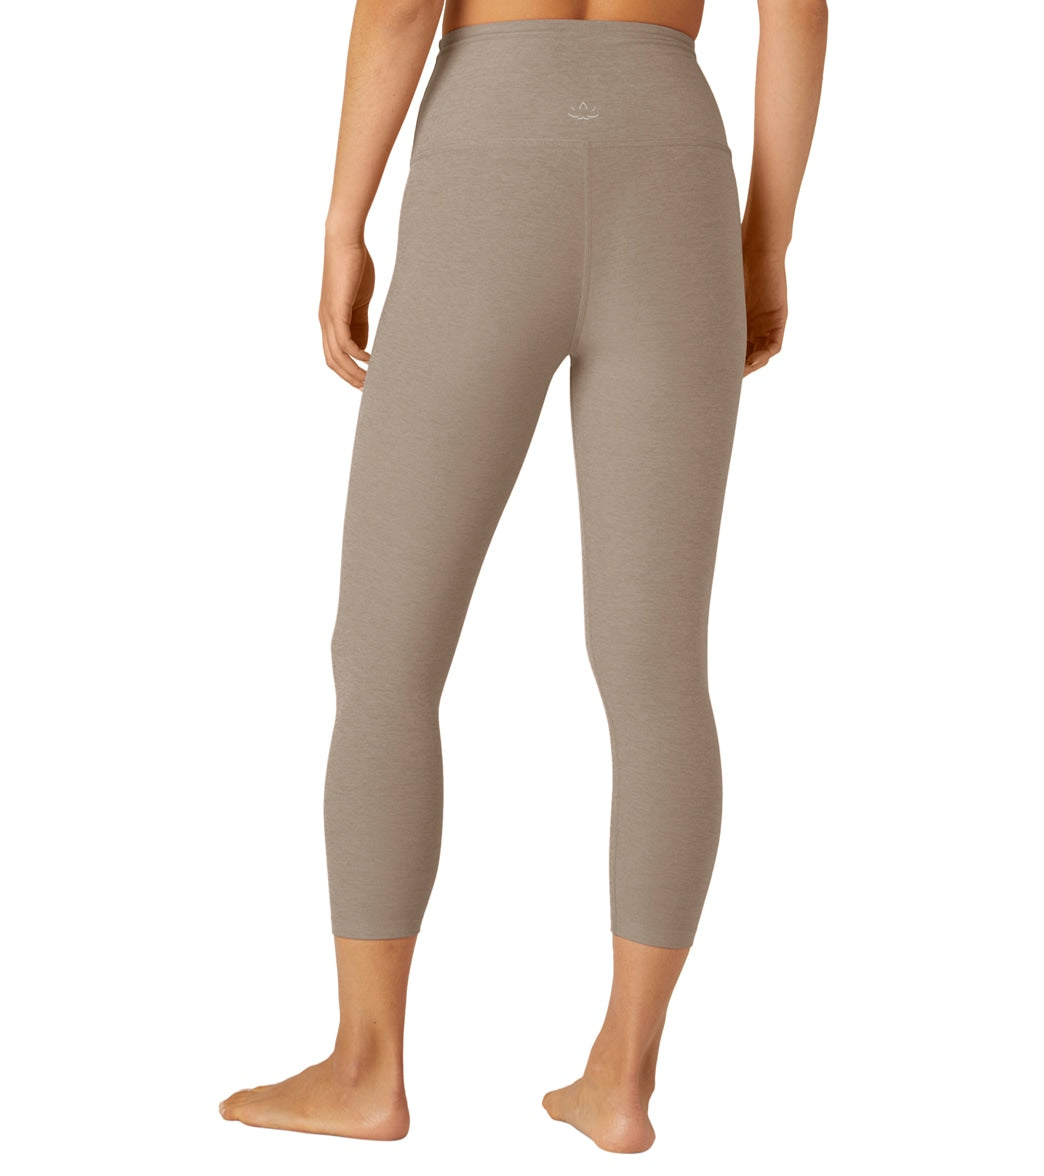 https://www.alloyapparesl.shop/wp-content/uploads/1706/54/only-38-00-usd-for-beyond-yoga-spacedye-high-waisted-yoga-capris-birch-heather-online-at-the-shop_2.jpg